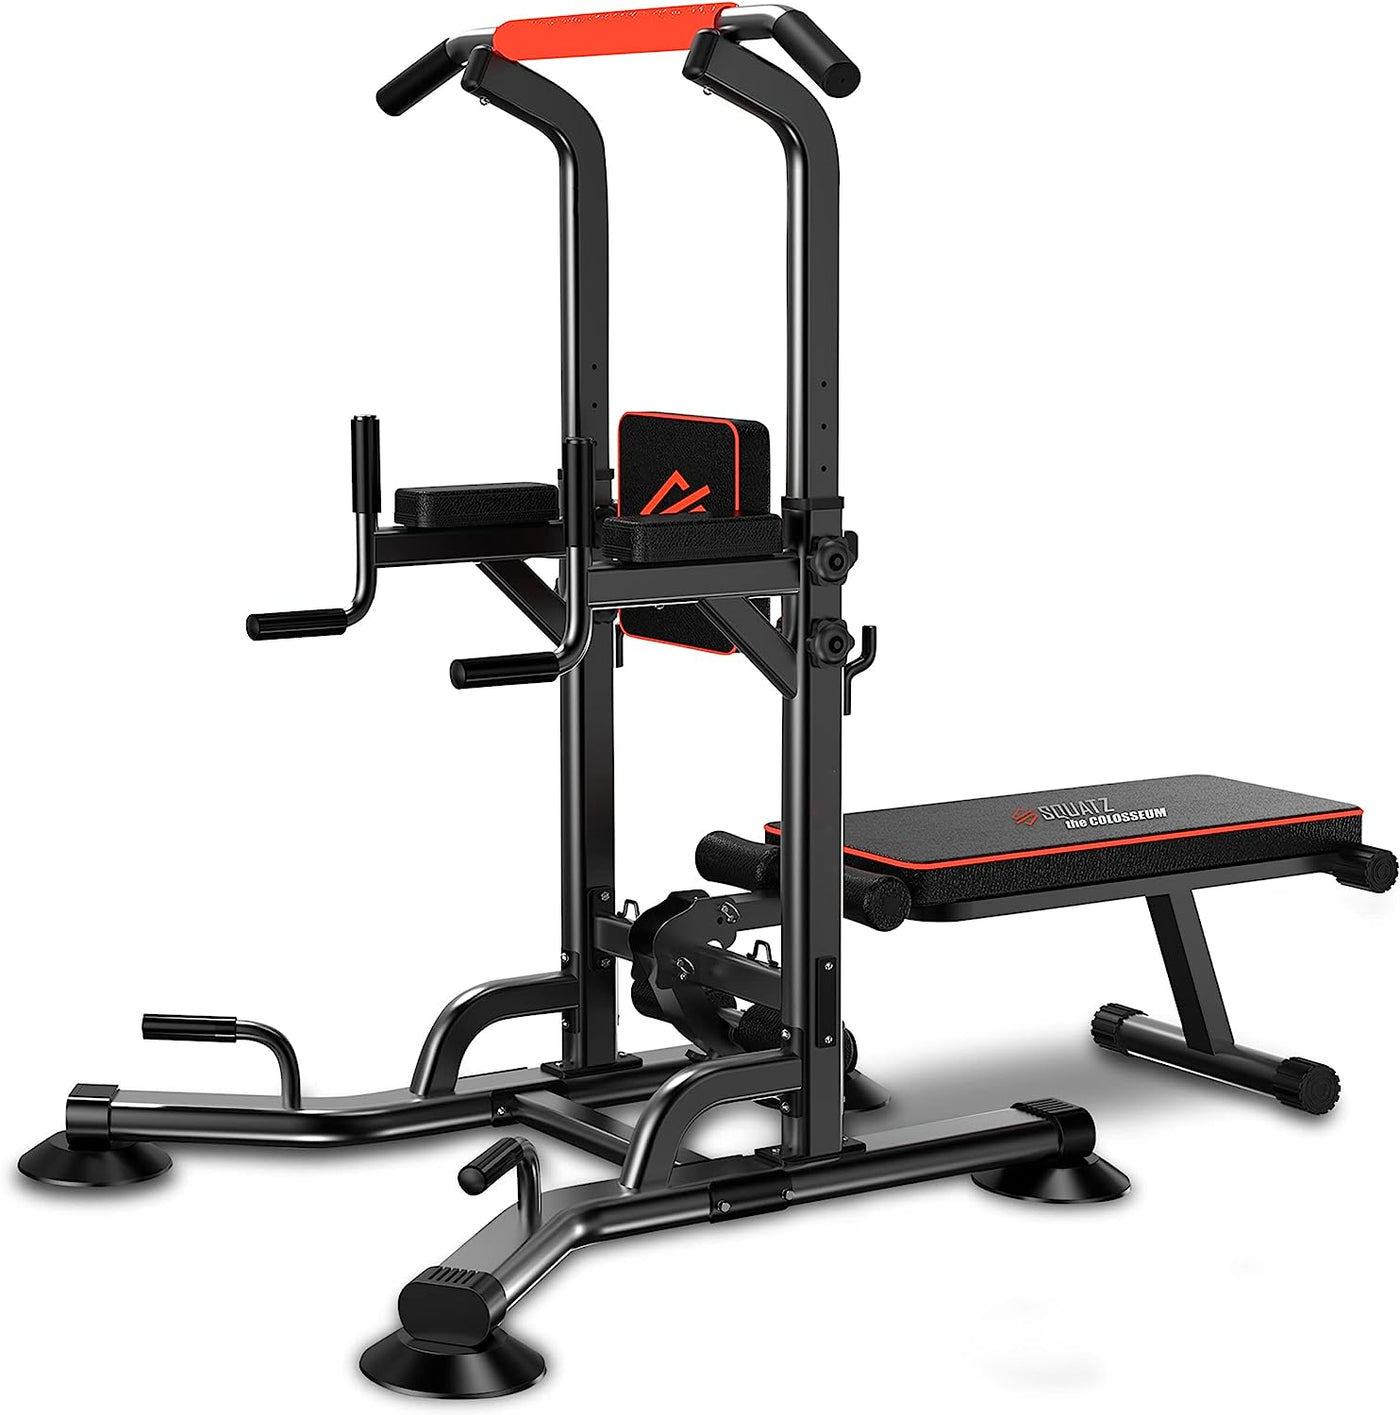 SQUATZ Pull-Up Workout Station with Bench - Multifunctional Gym - $180